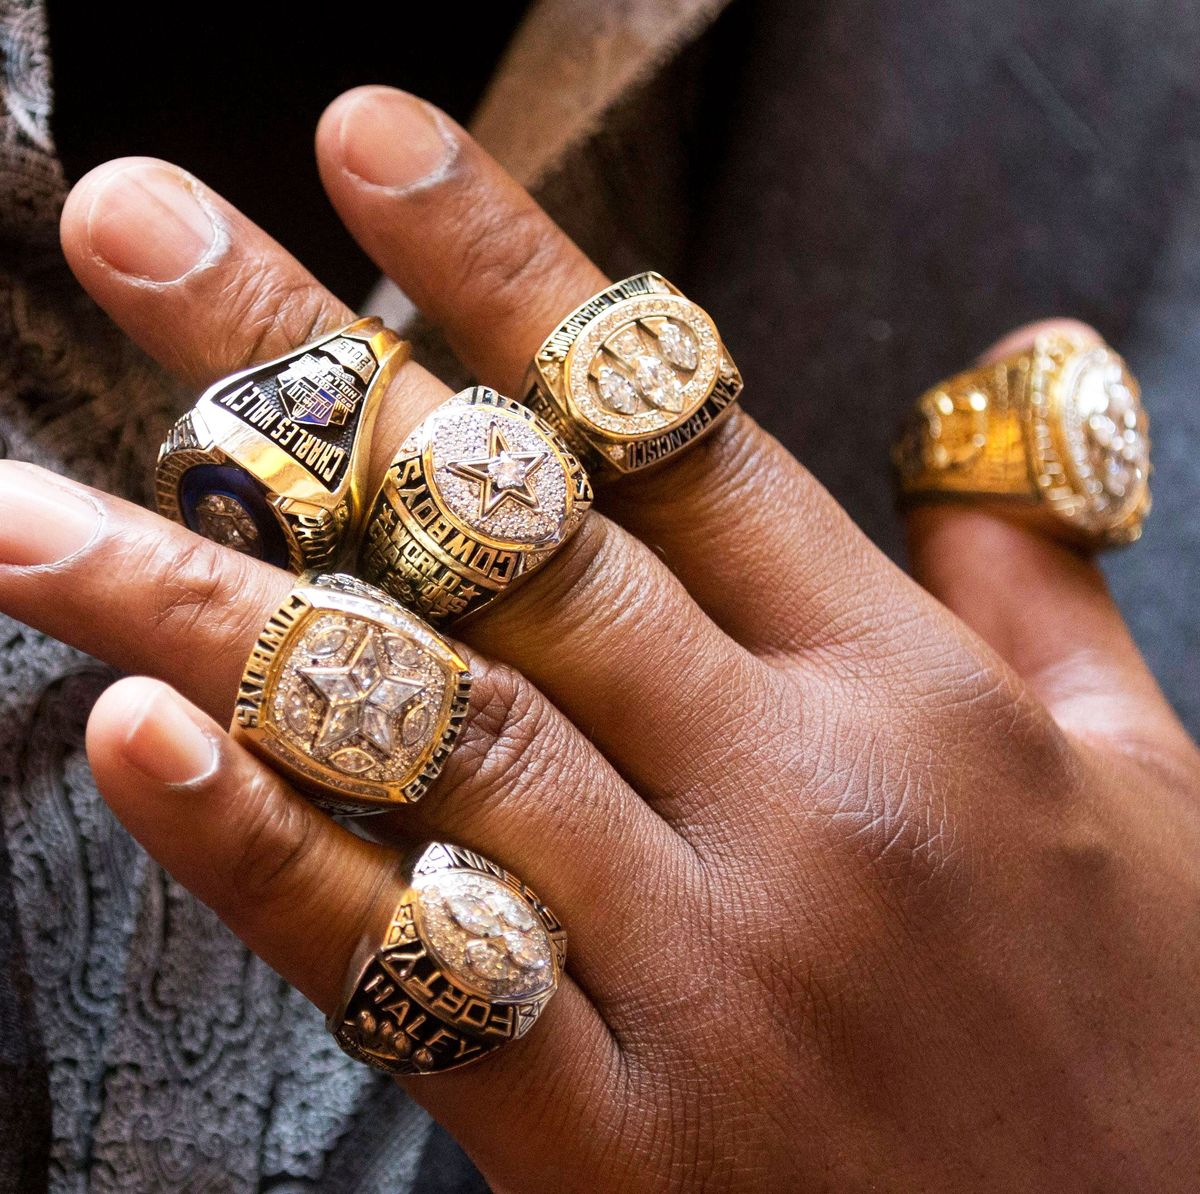 Who Has the Most Super Bowl Rings? — Players with Most Super Bowl